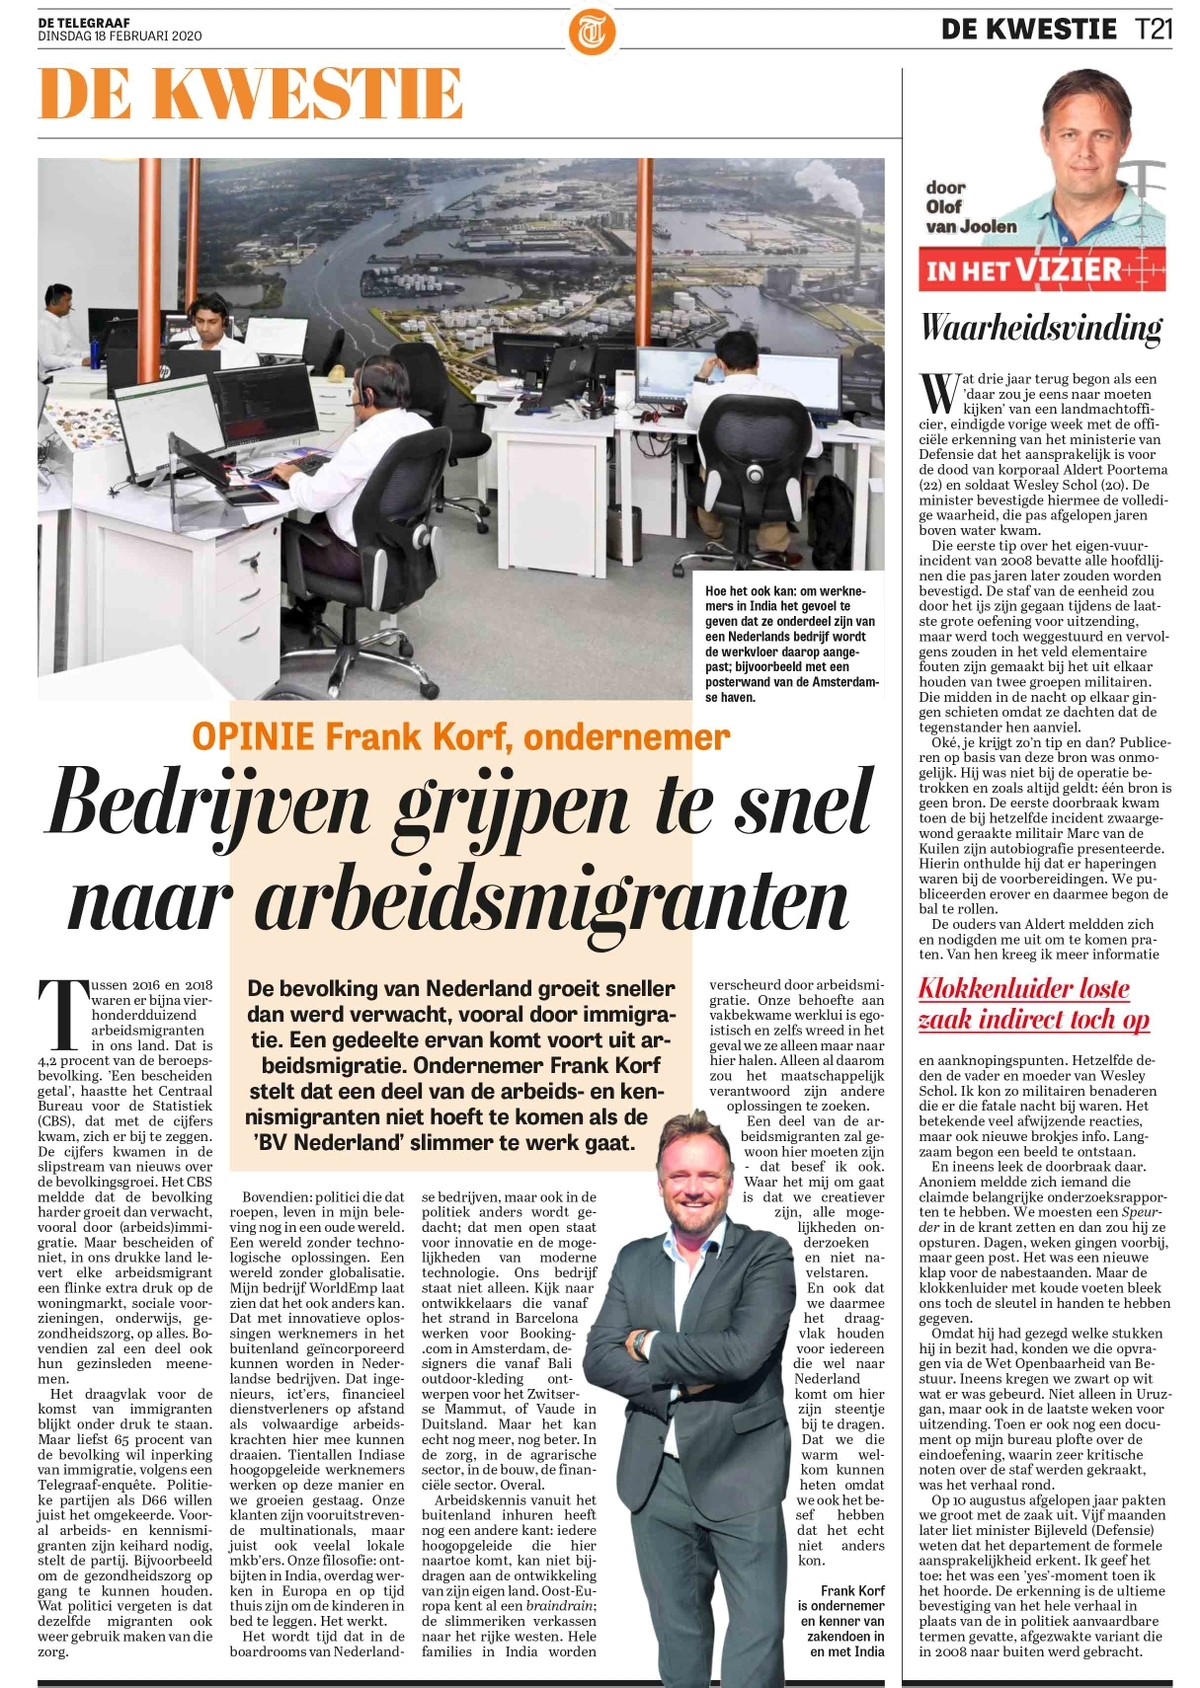 Article in the biggest daily newspaper about WorldEmp (in Dutch)